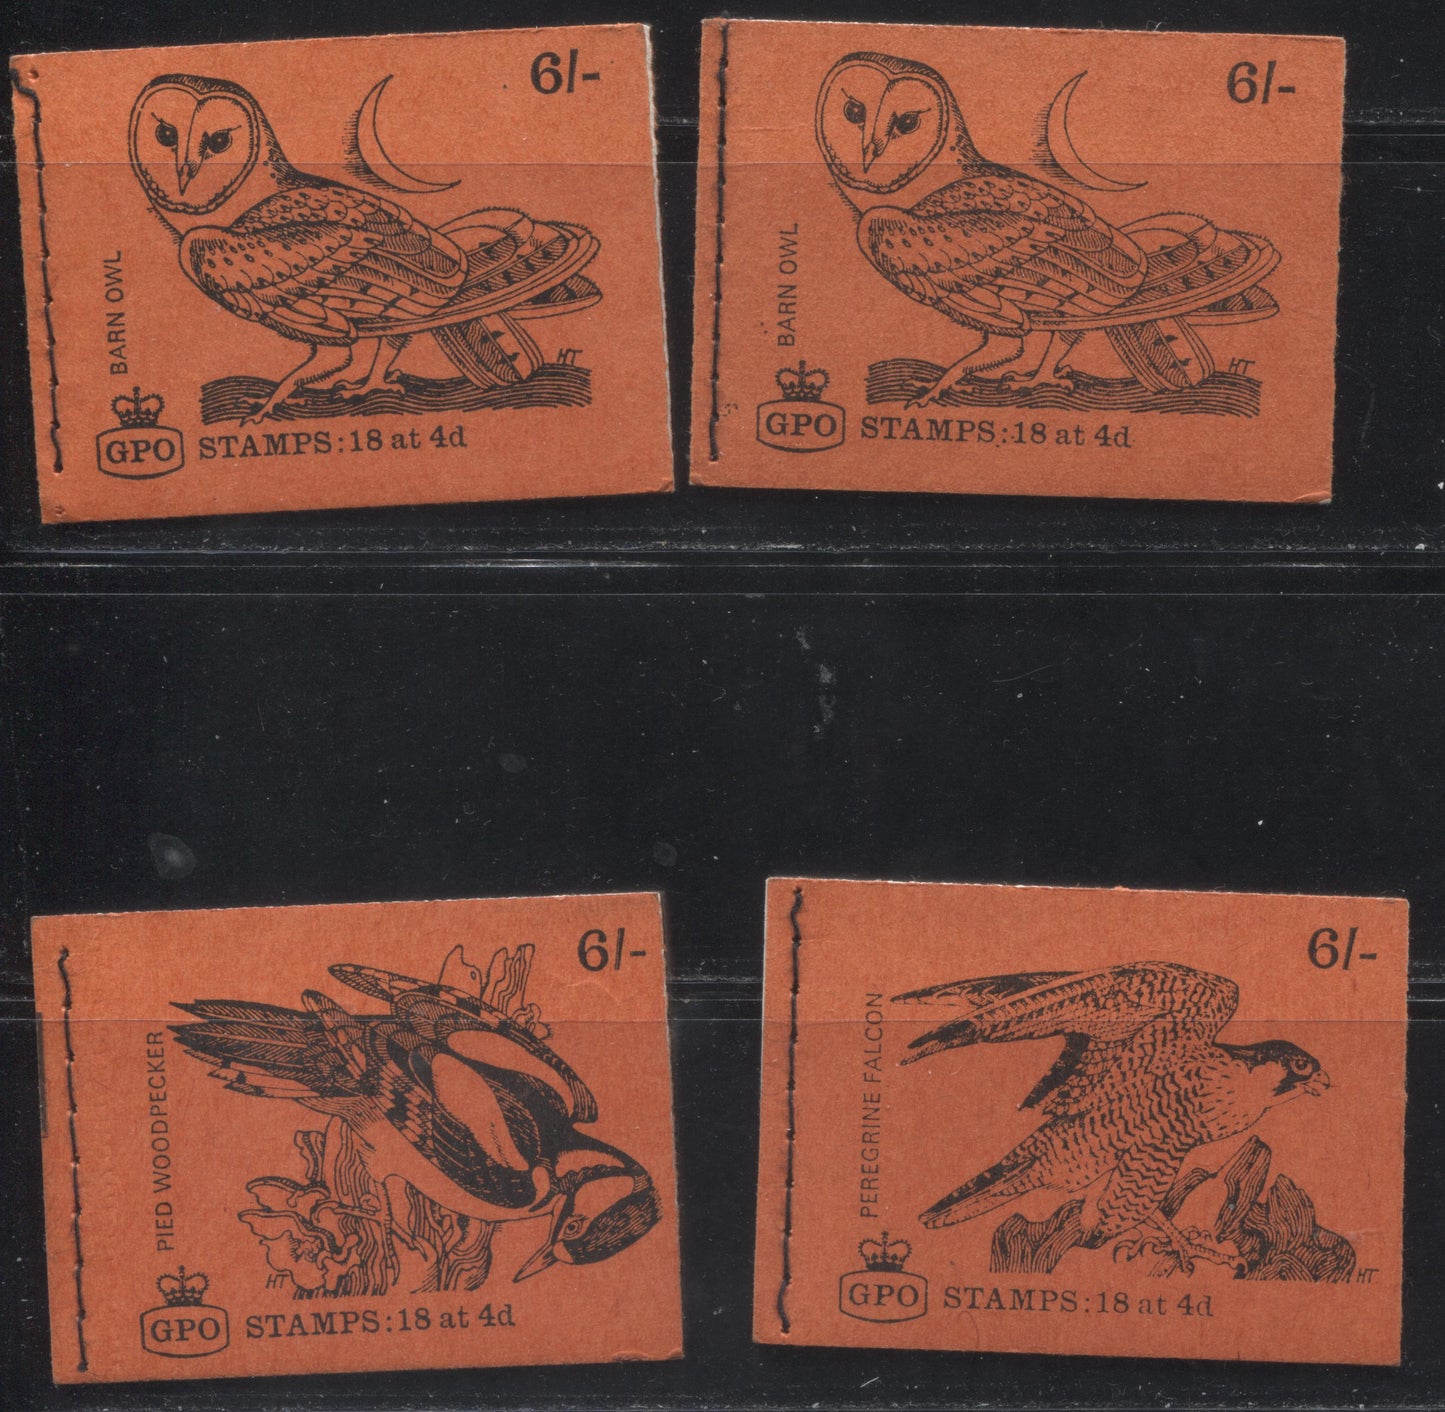 Lot 266 Great Britain SG#QP40/QP45 6/- Black on Deep Orange 1967-1971 Pre-Decimal Machin Heads Issue, 4 Complete Booklets From August & November 1968 & January 1969 Various Fluorescence Levels For Covers and Interleaving Pages, Various Covers, F-VFNH